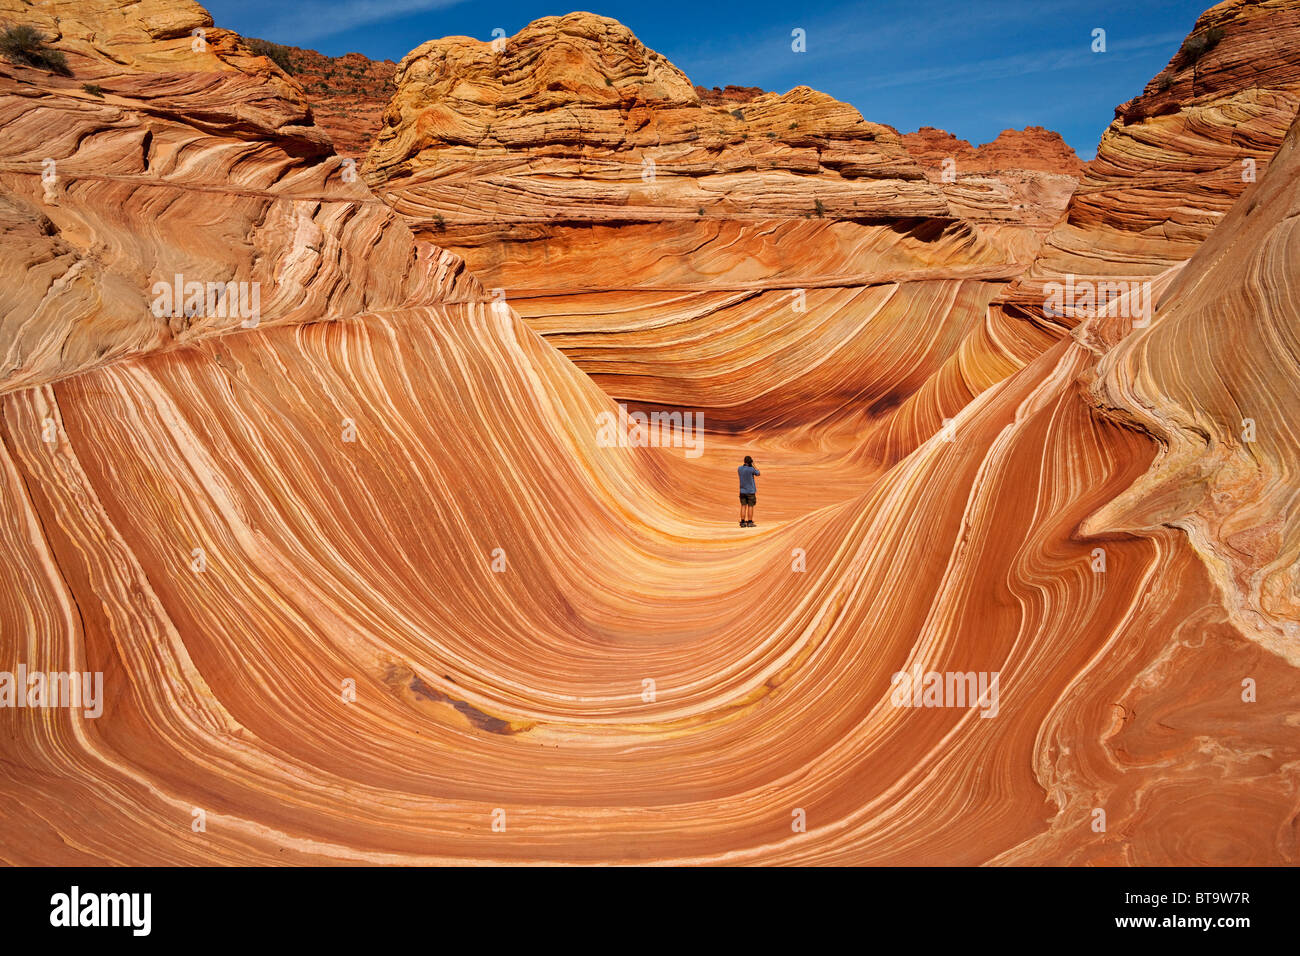 Tourist in The Wave, rock formation in Coyote Buttes North, Paria Canyon-Vermilion Cliffs Wilderness, Utah, Arizona, USA Stock Photo